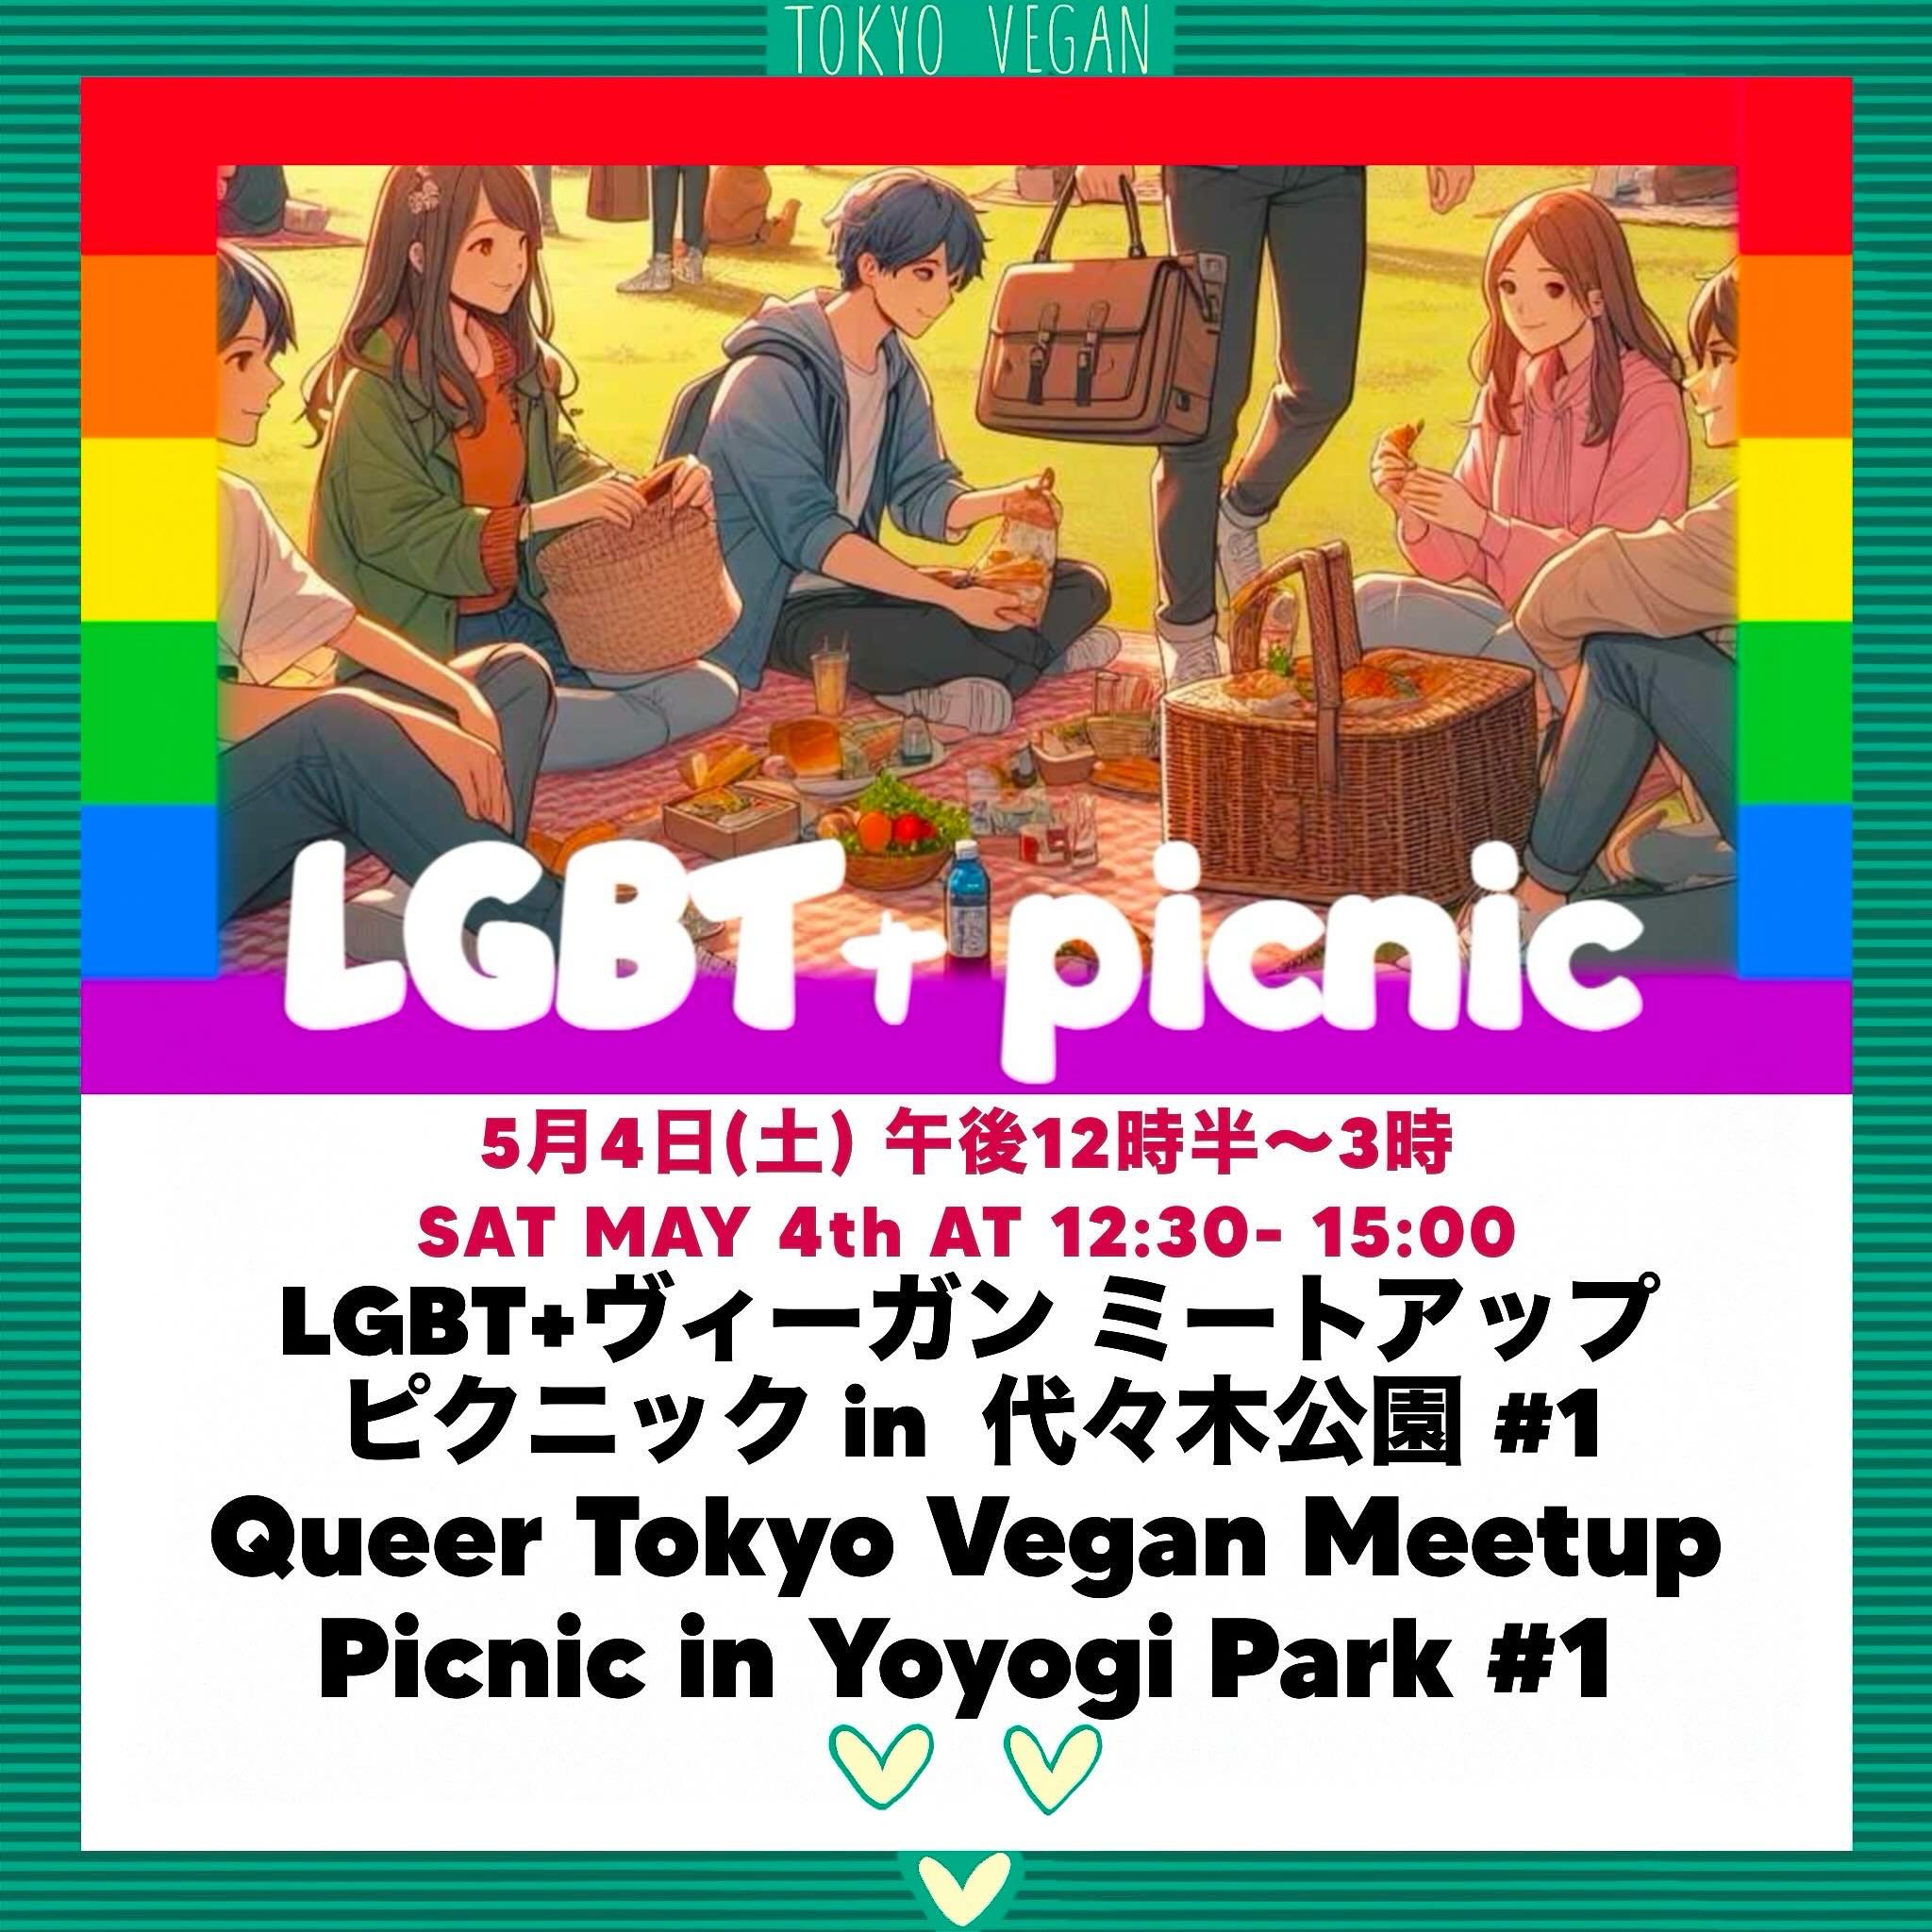 LGBT+ヴィーガンミートアップ ピクニック🌈QUEER Vegan Meetup picnic 5 月4日(土) Yoyogi Park 

Join us for a picnic in Yoyogi park on Saturday May 4th.
5月4日土曜日、代々木公園にてピクニックを開催します！

This is the first Tokyo Vegan Meetup  event specifically for queer and questioning people.
